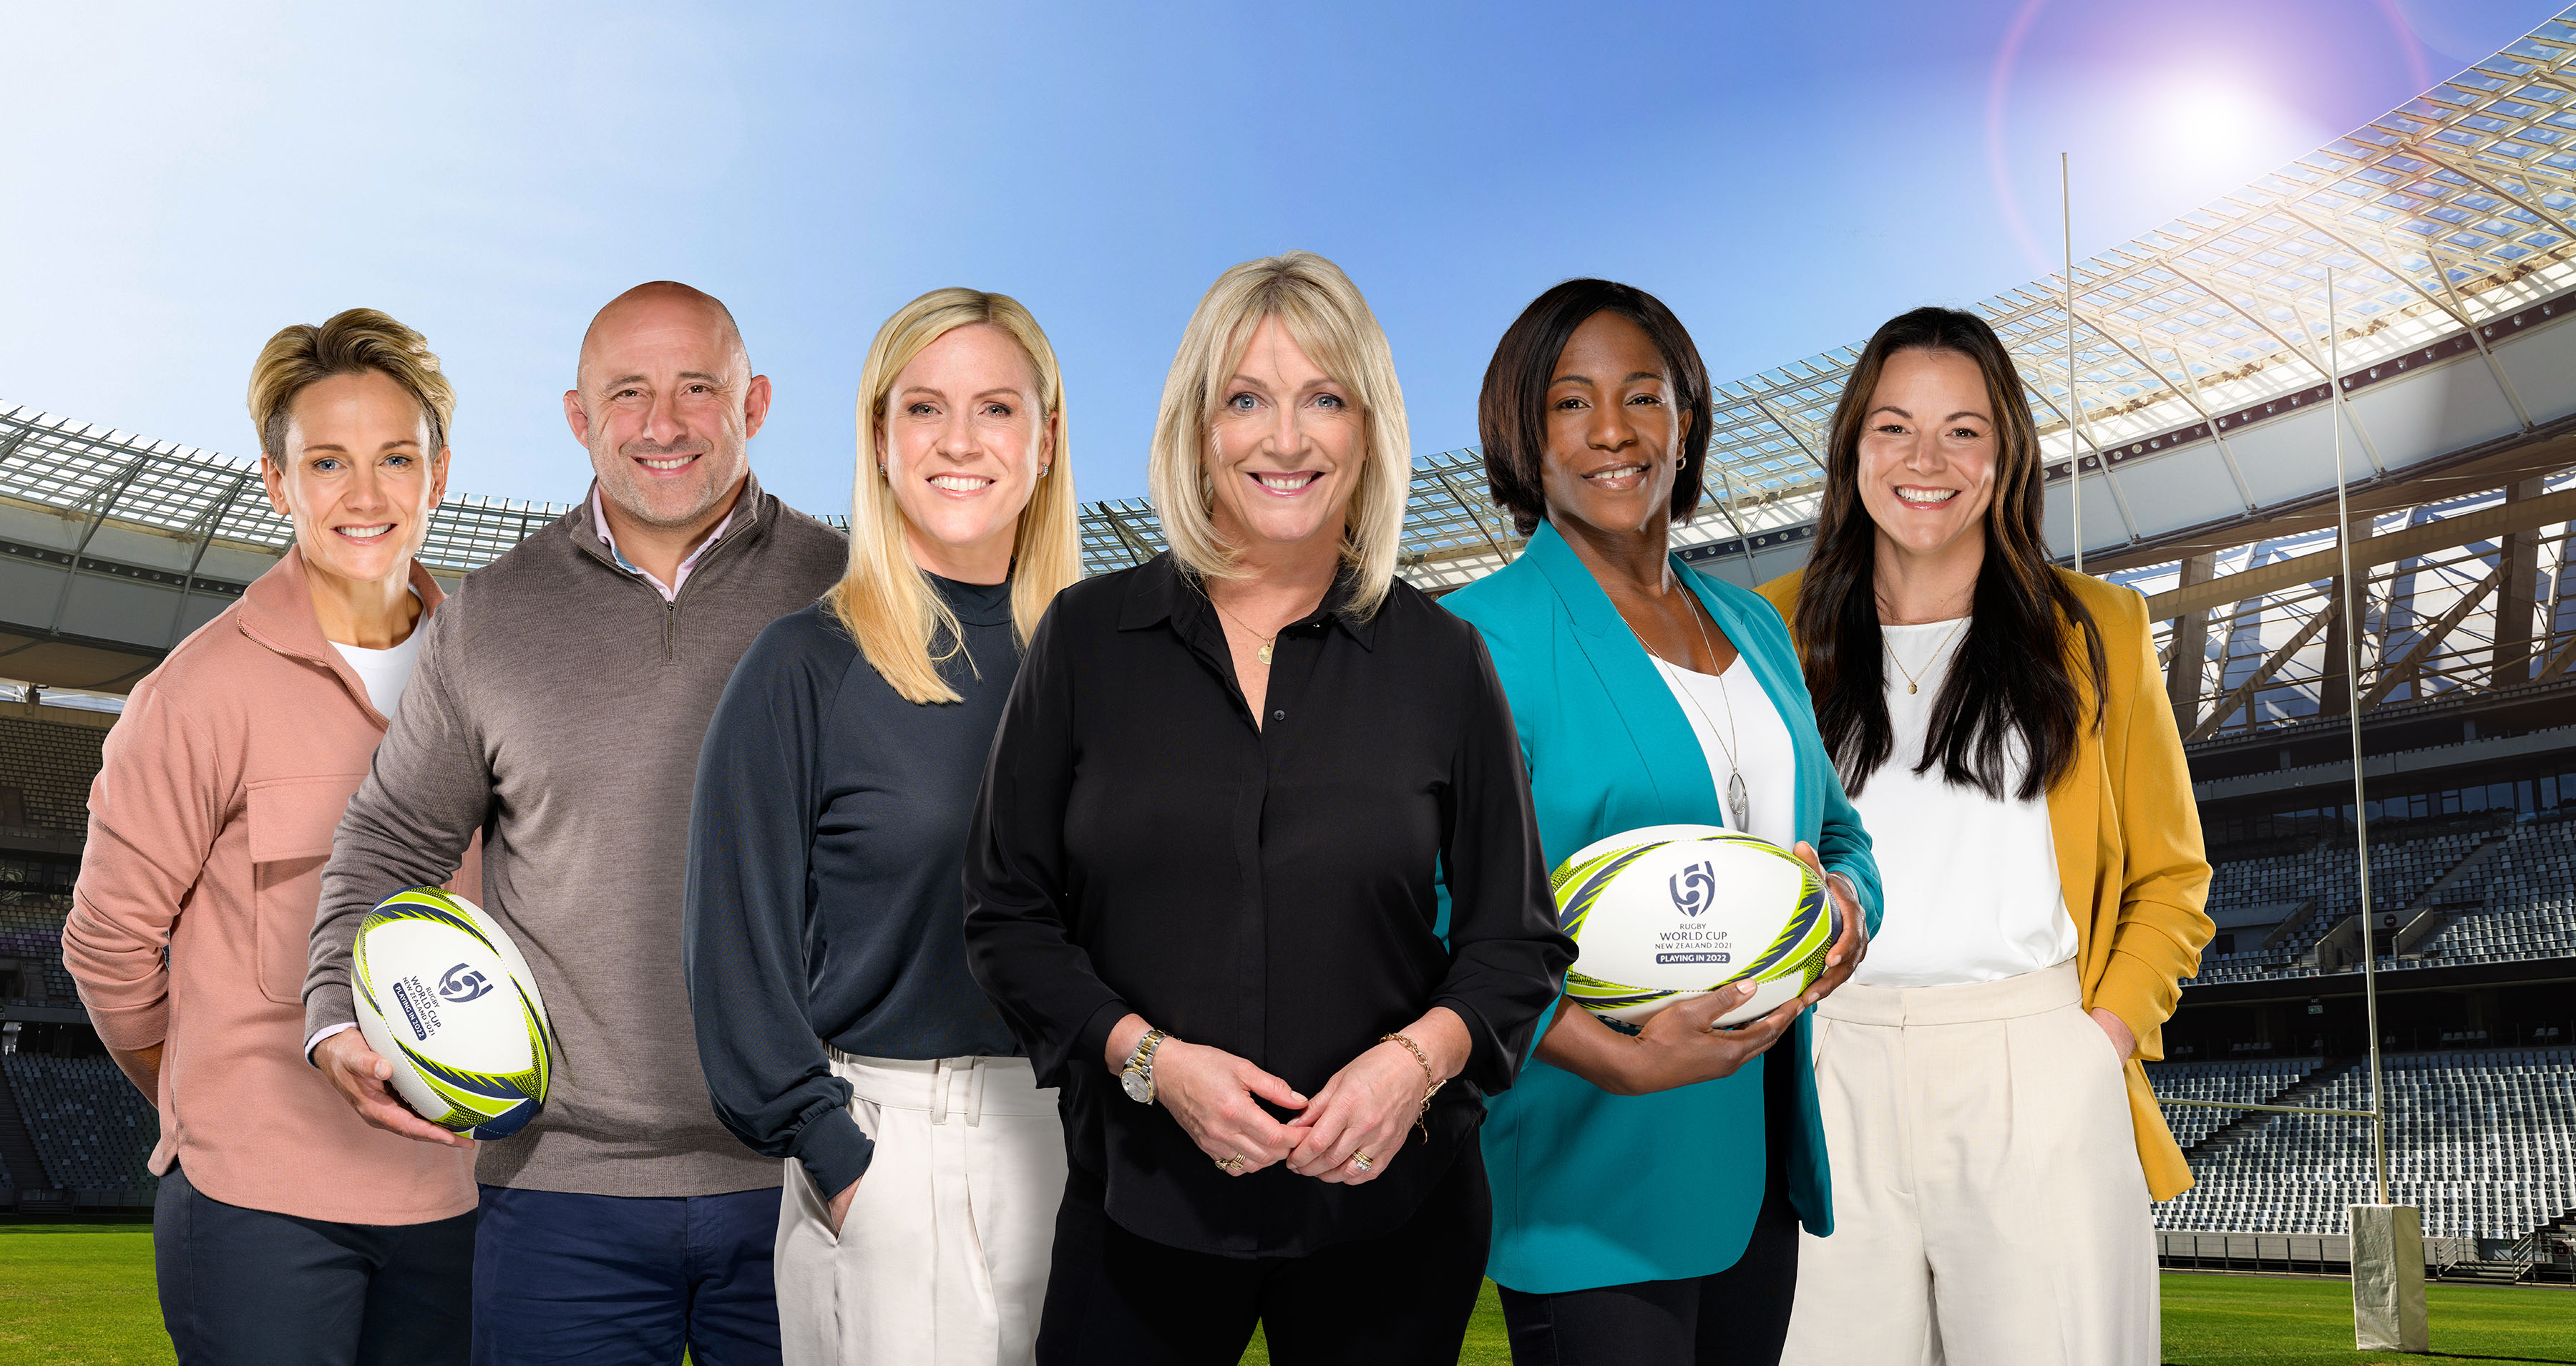 womens rugby world cup 2022 tv coverage